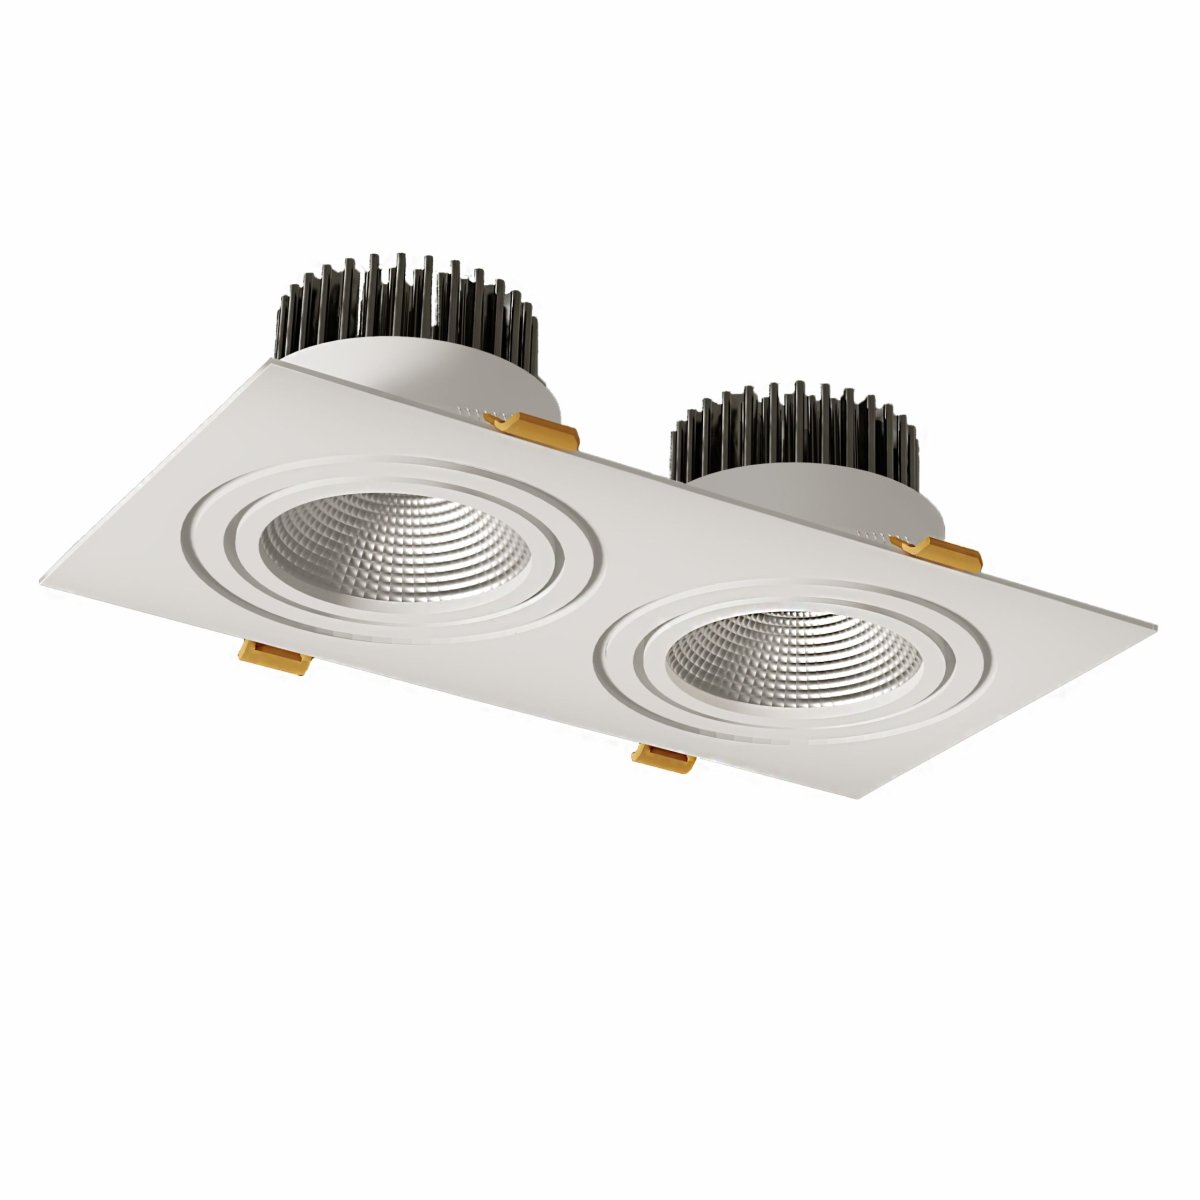 Main image of LED Recessed Downlight 2X5W Cool White 4000K White IP20